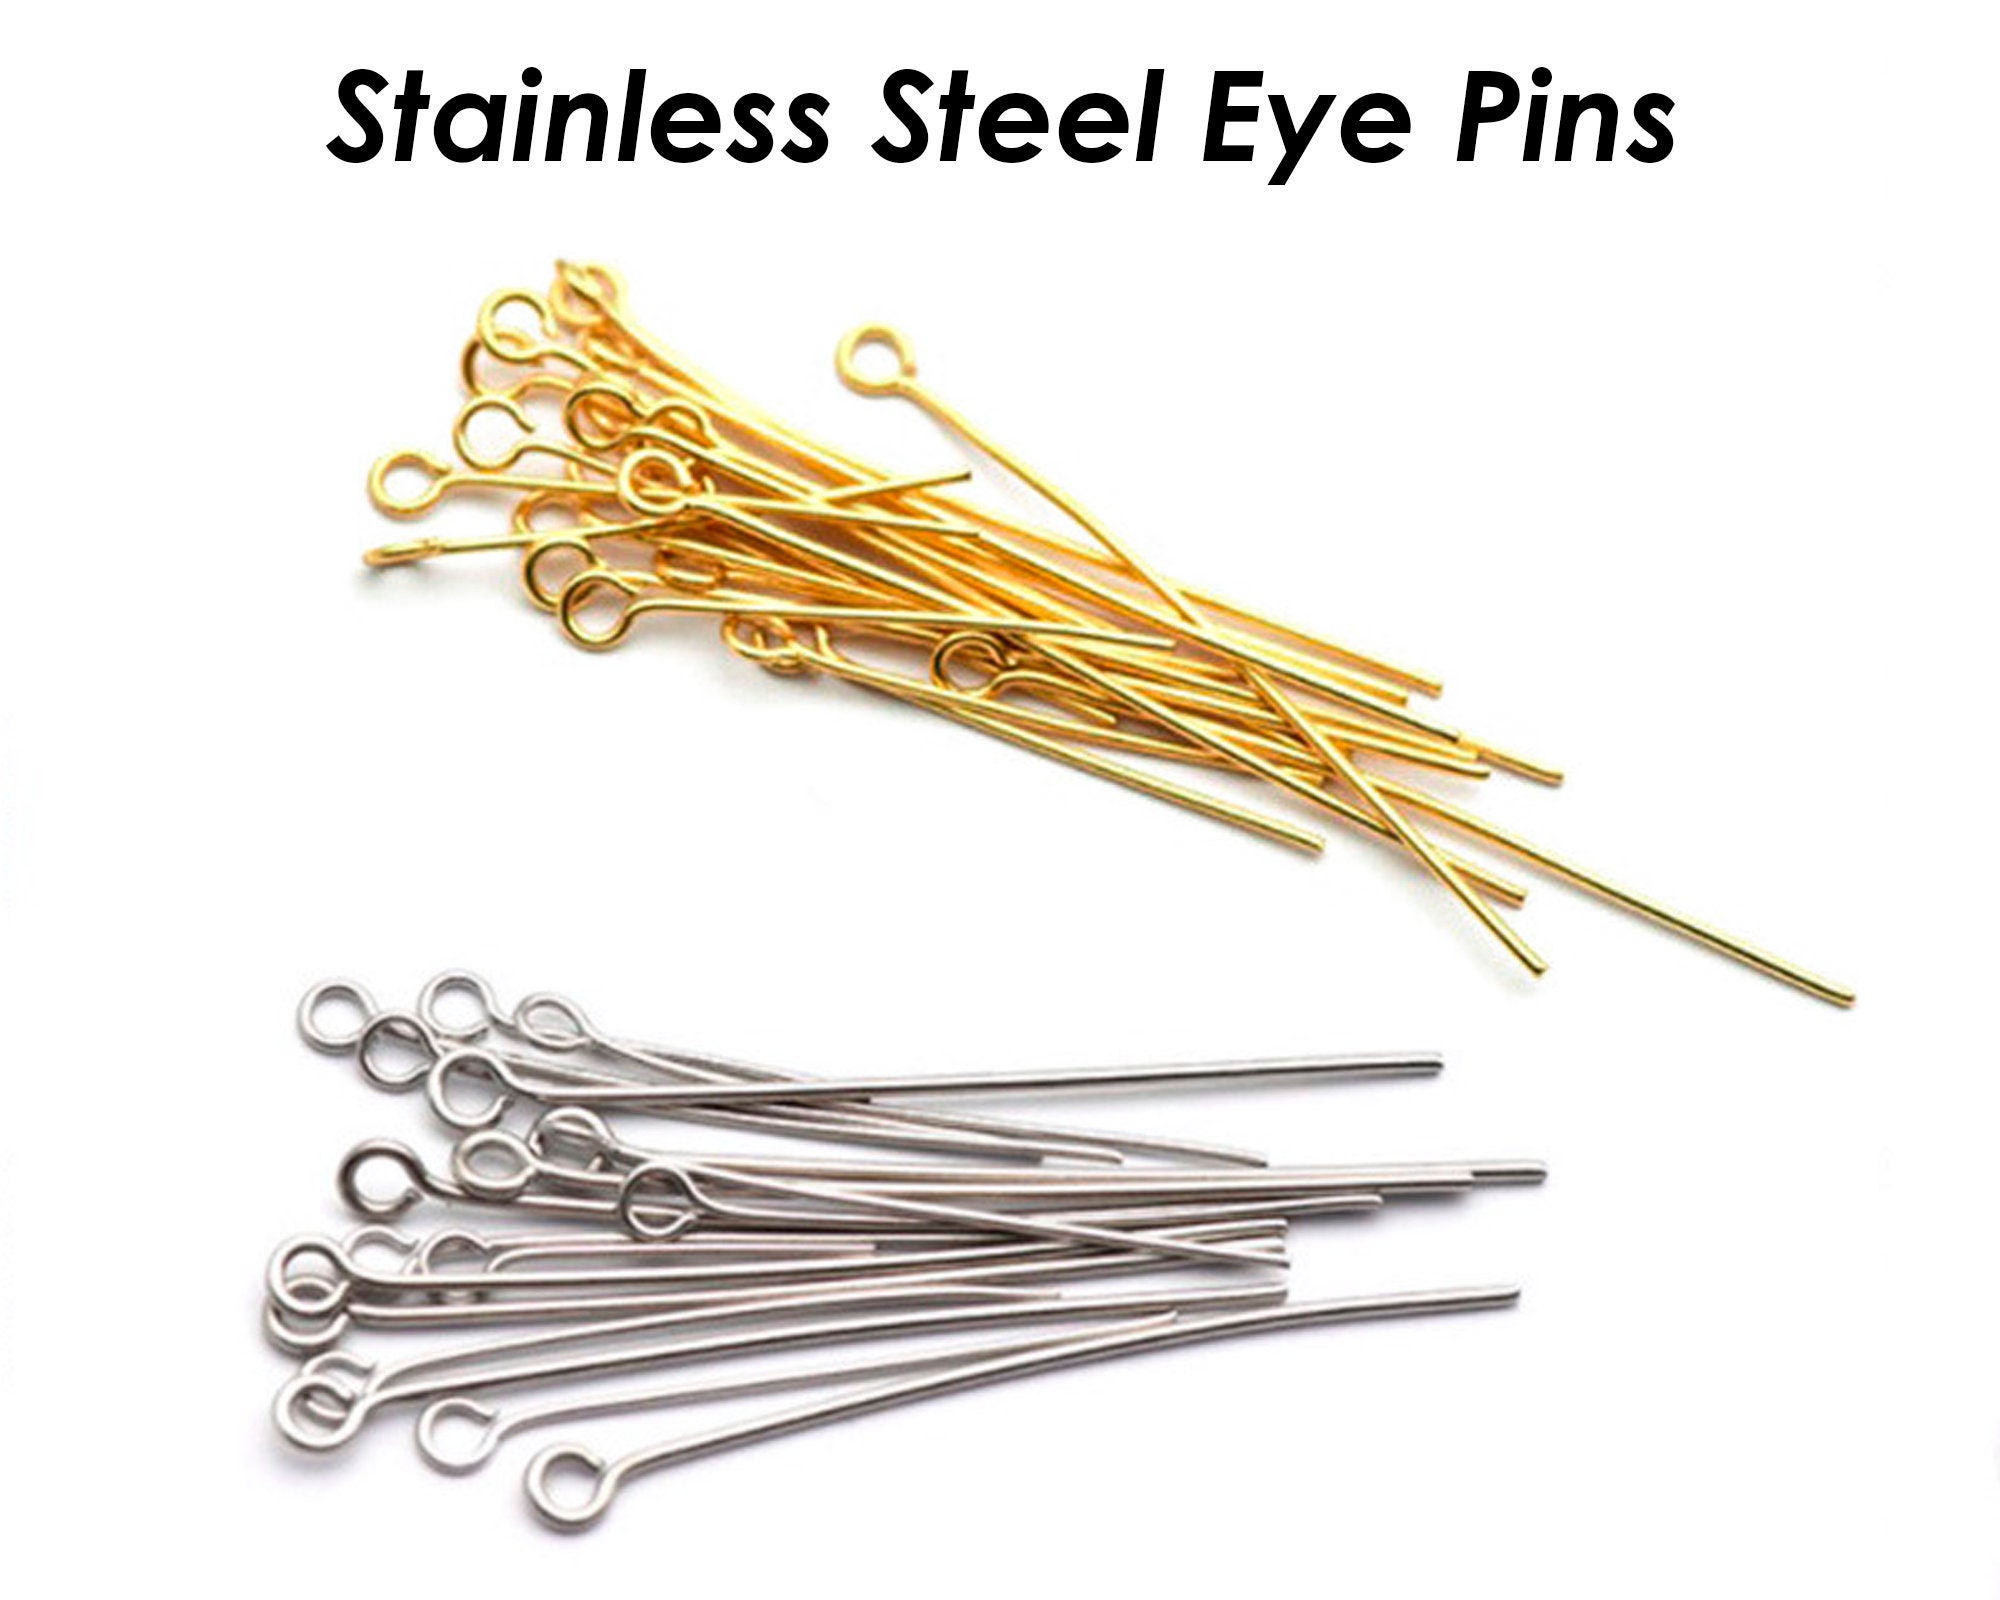 Stainless Steel Pins for Art Glitter Glue - Stainless Steel Colored Round  Heads, 1.5  Long - One Set of 5